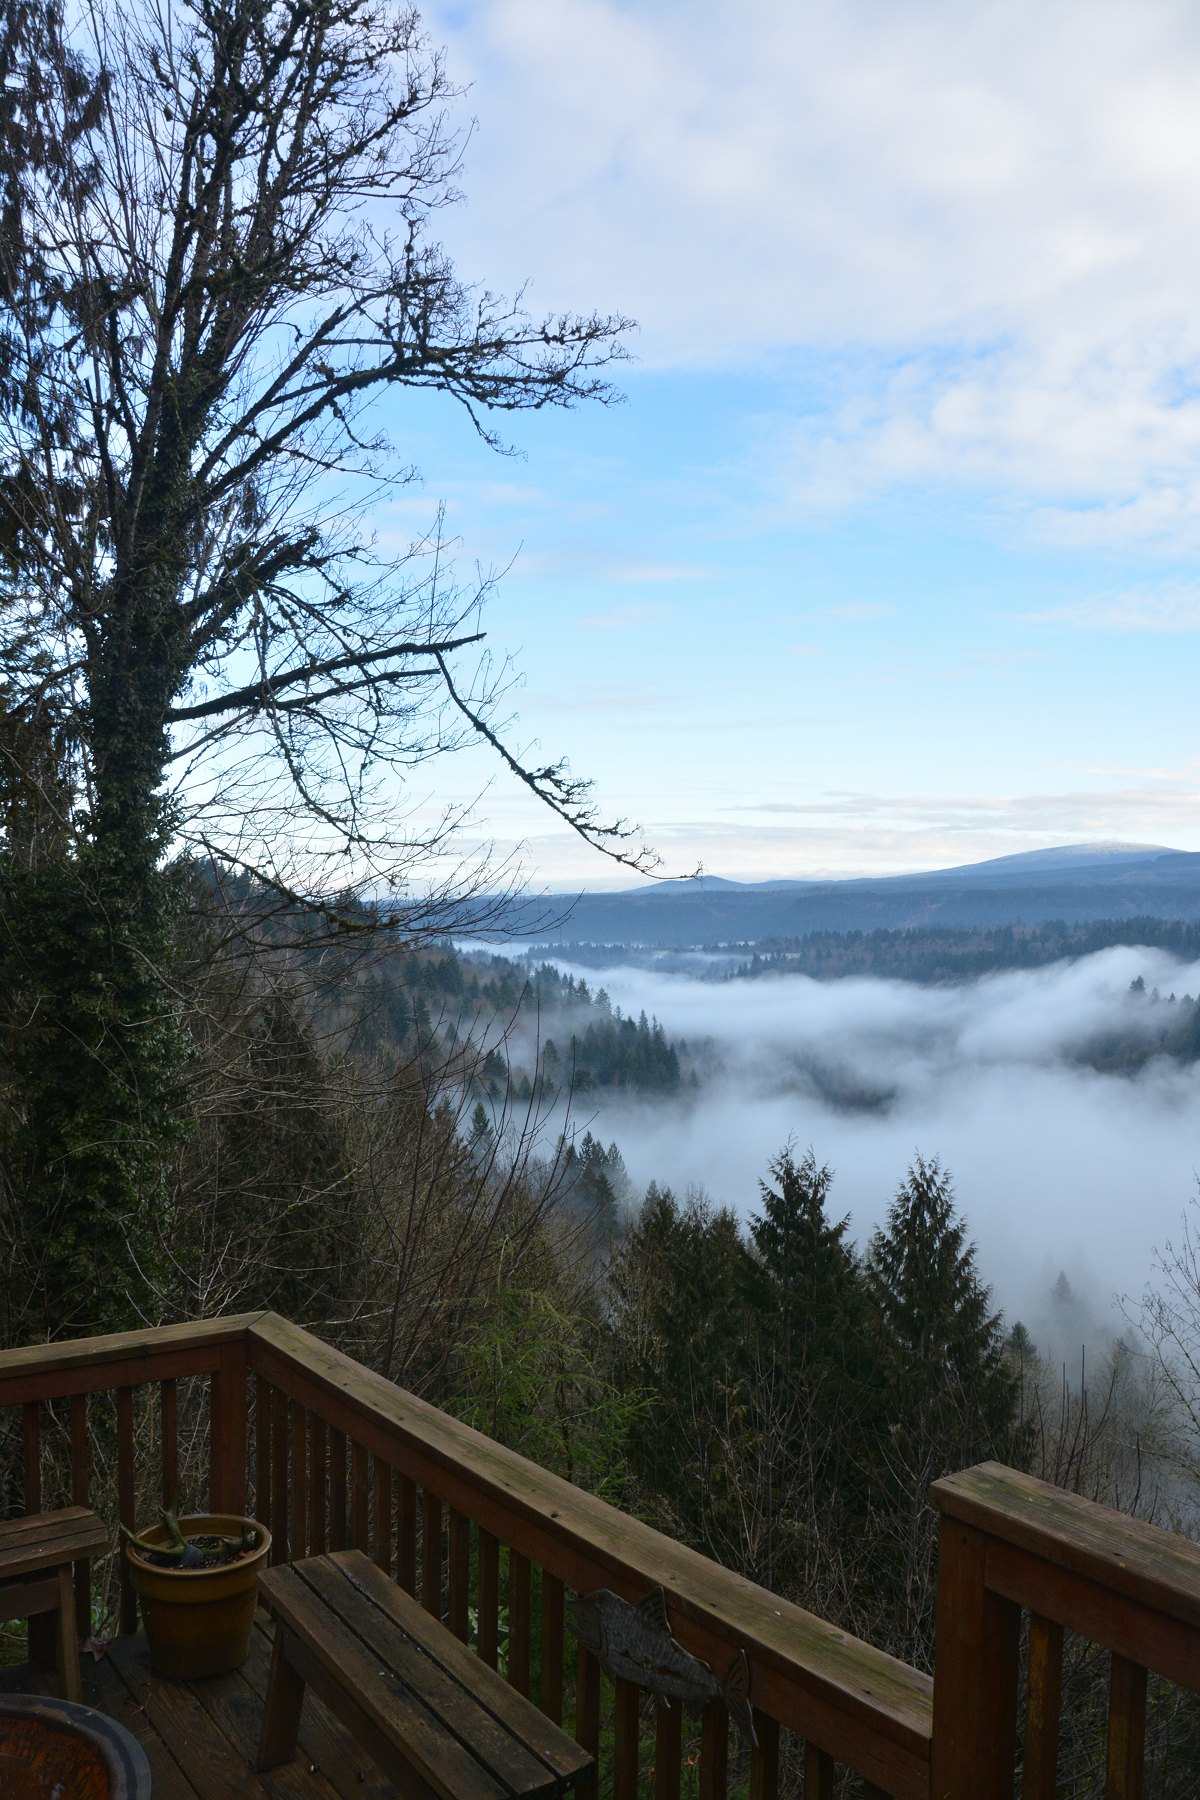 Rodney's deck - morning foggy view - from the Dirt Biking with Miriam and Rodney photo gallery.